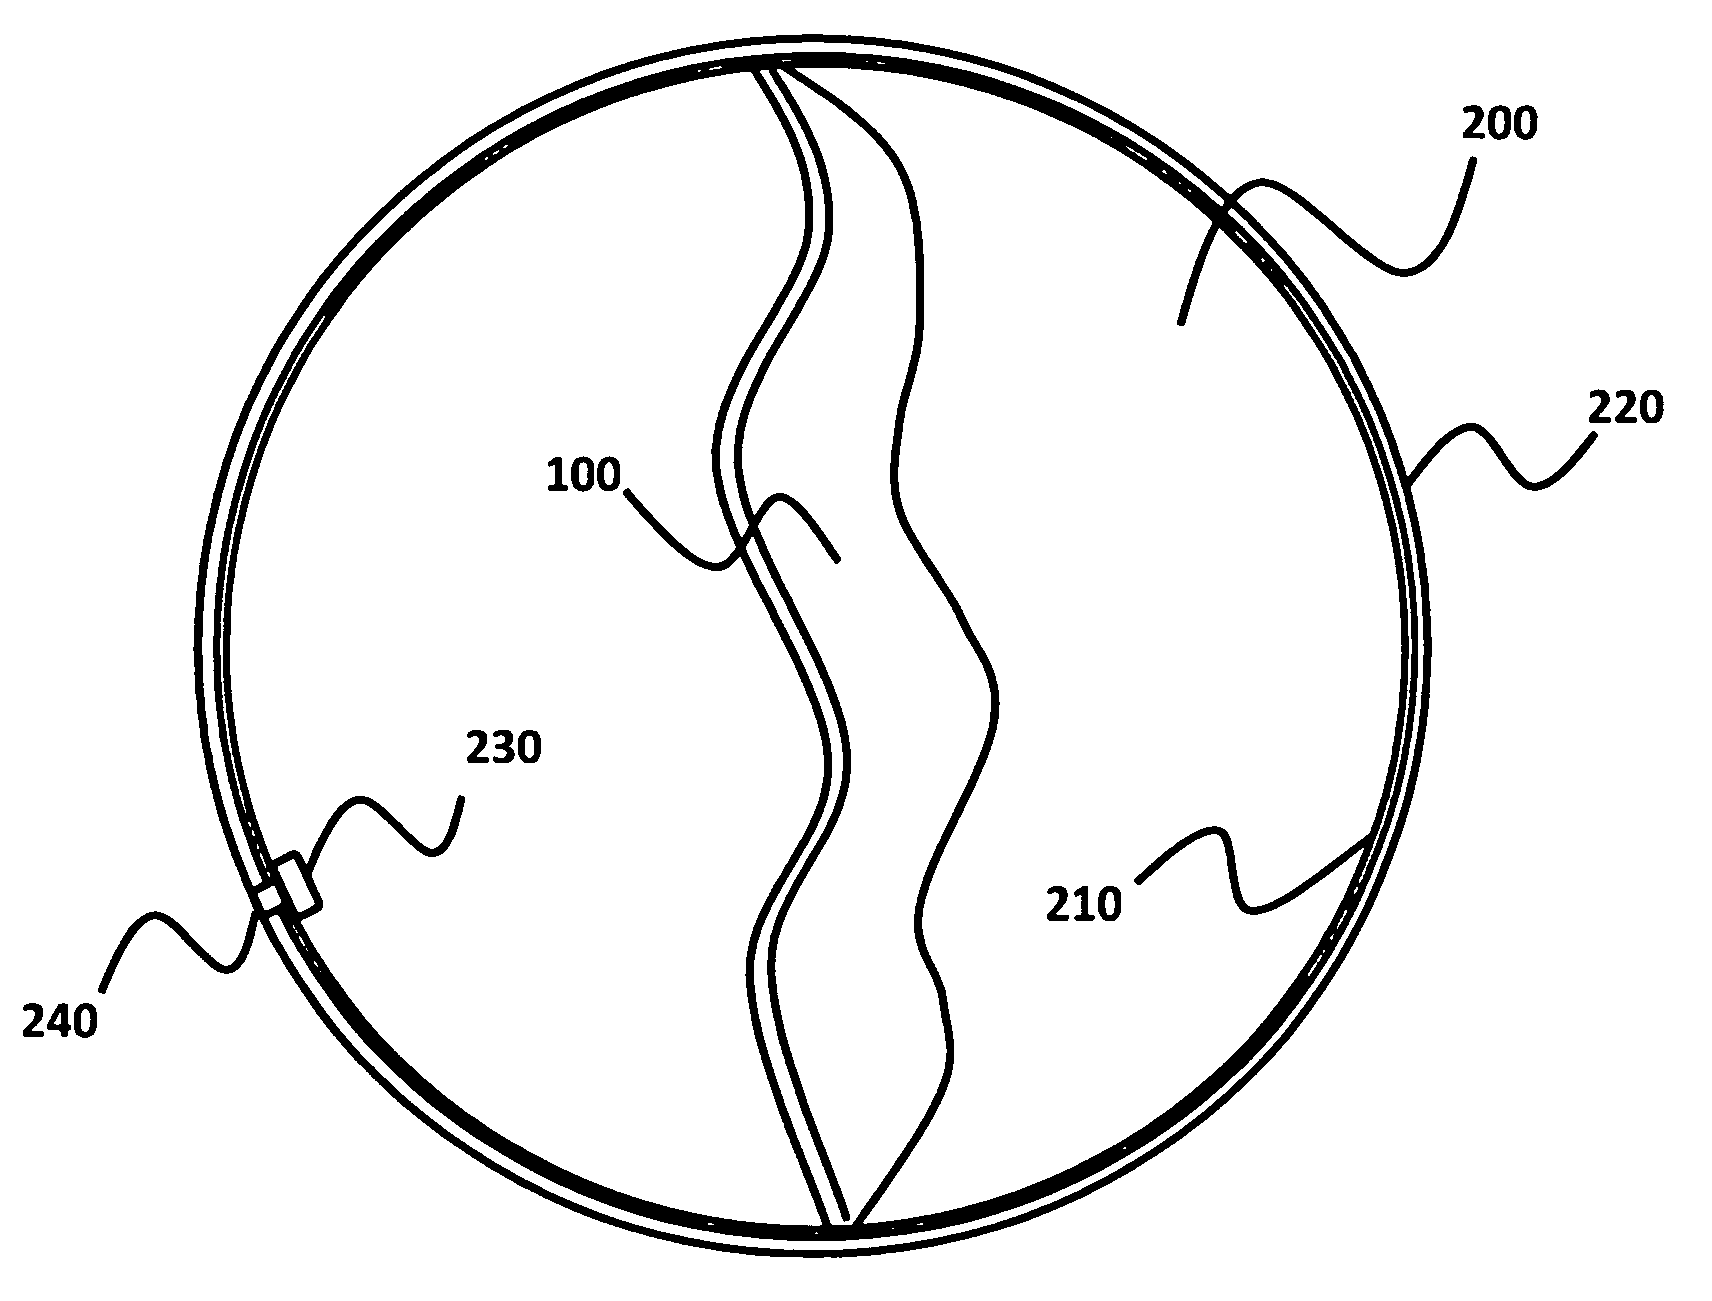 Game ball with noise suppression disk